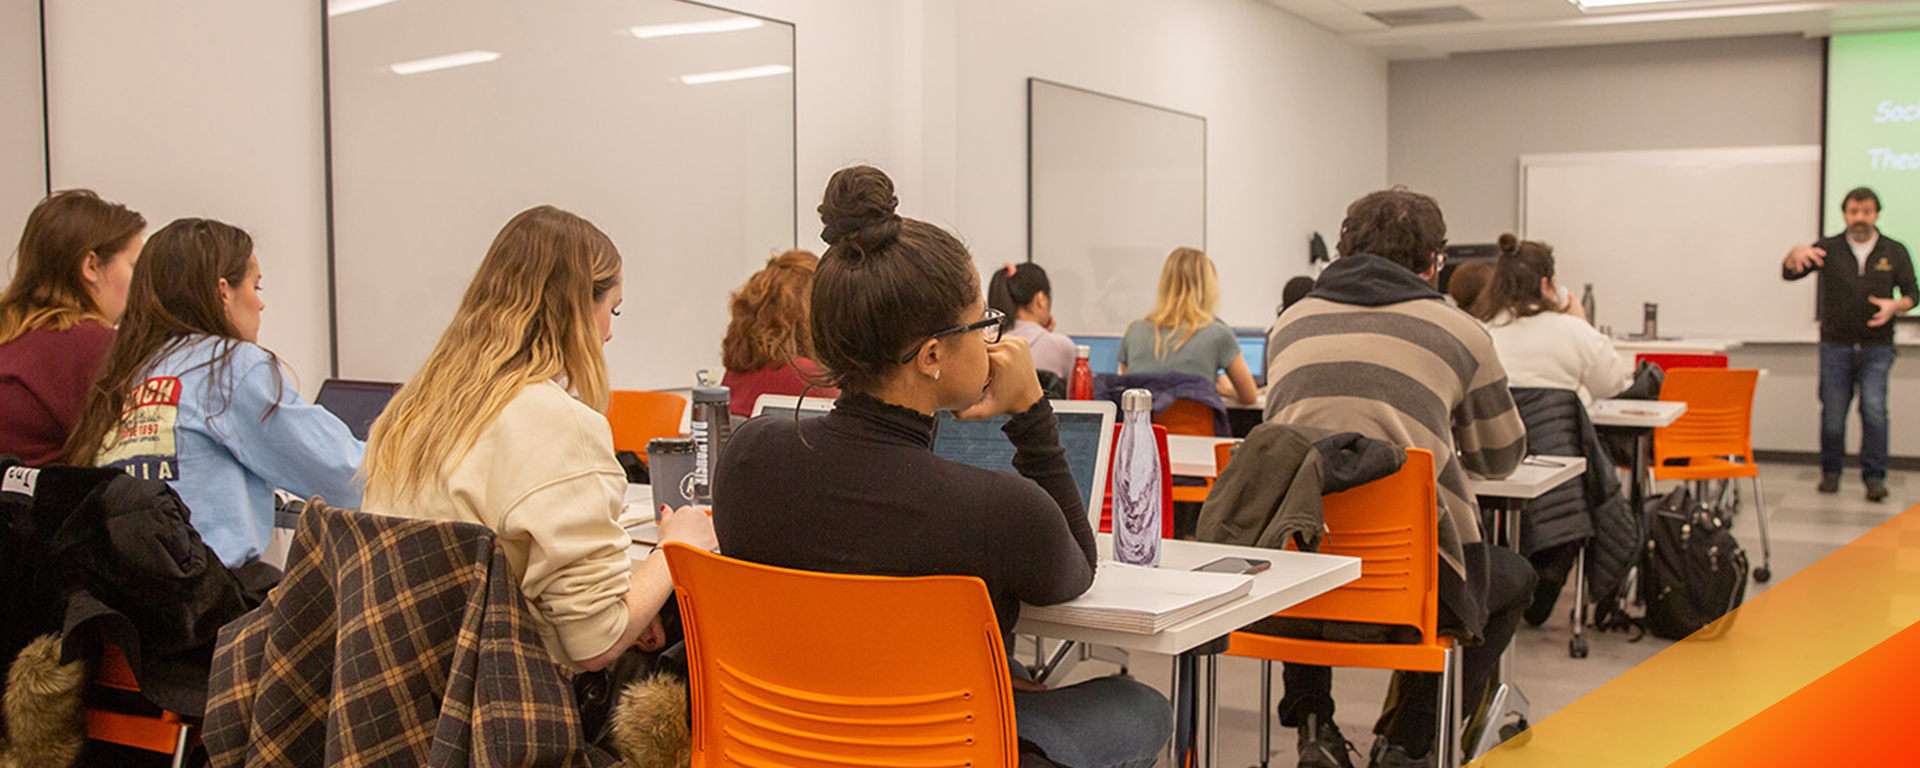 Students in a class room at our Calgary campus location